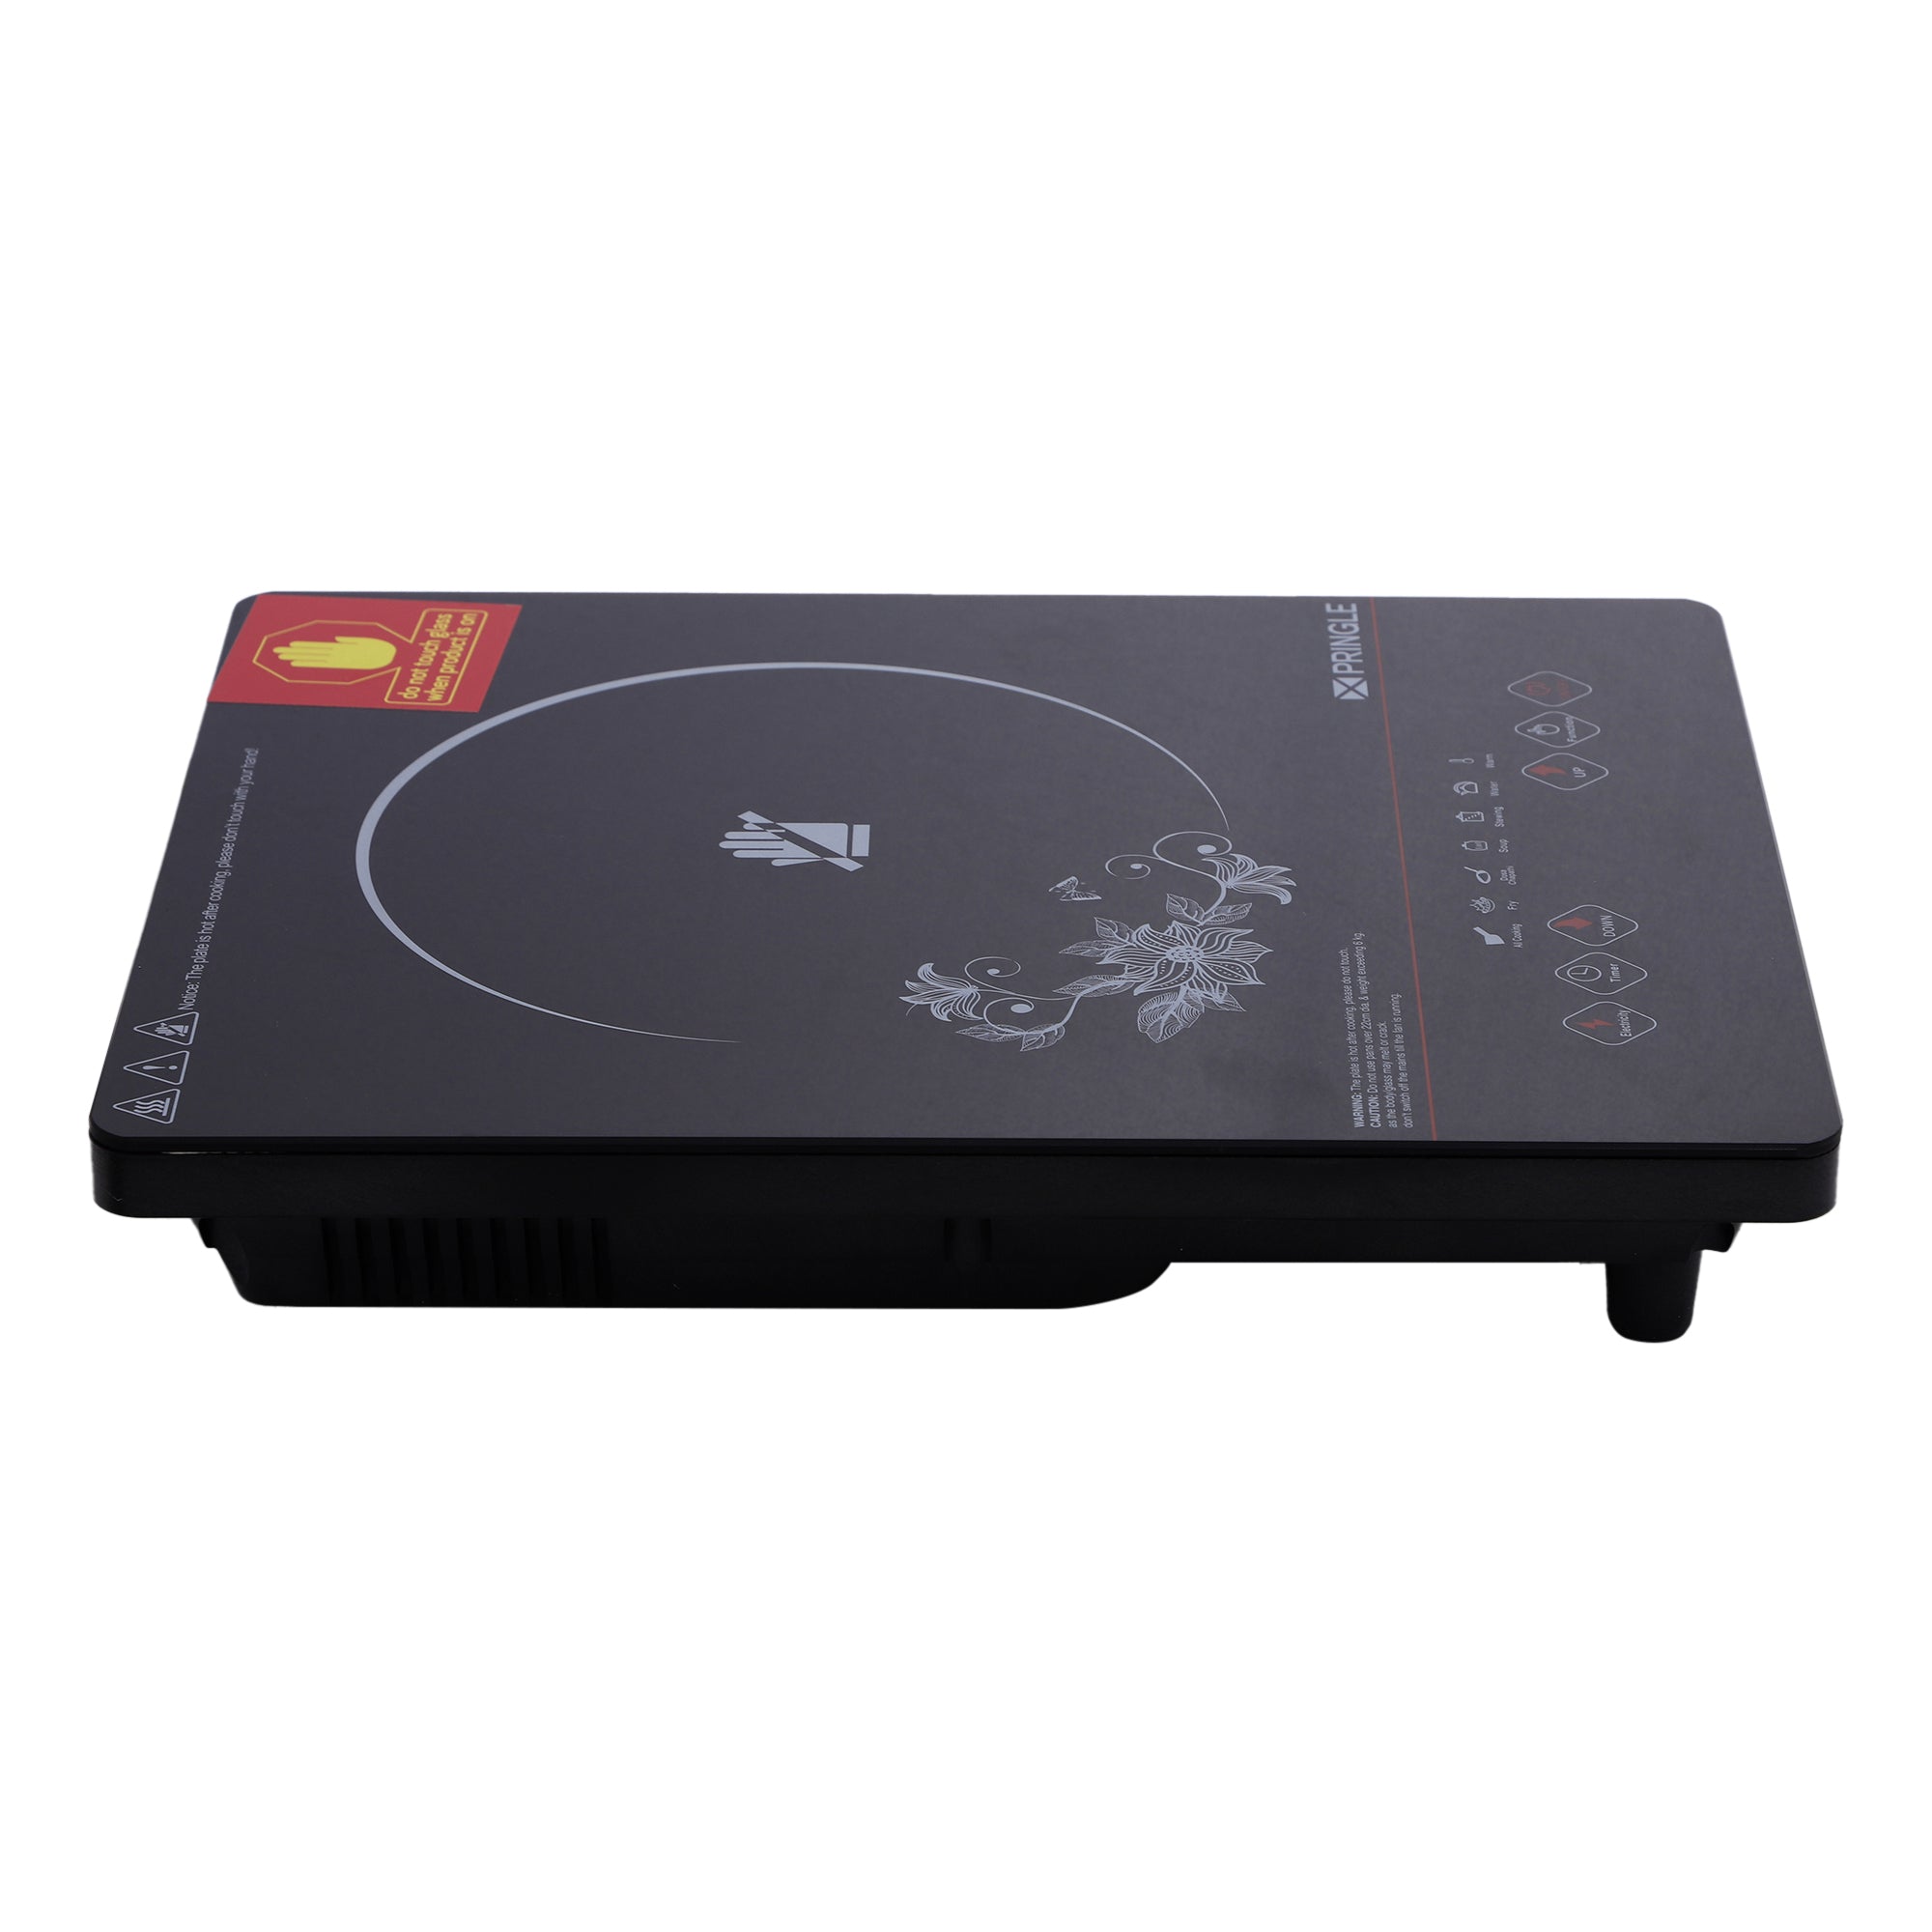 Induction Cooker IR - 02 Infrared / 2000W Metal body Crystal glass 12 Months Warranty - Pringle Appliances